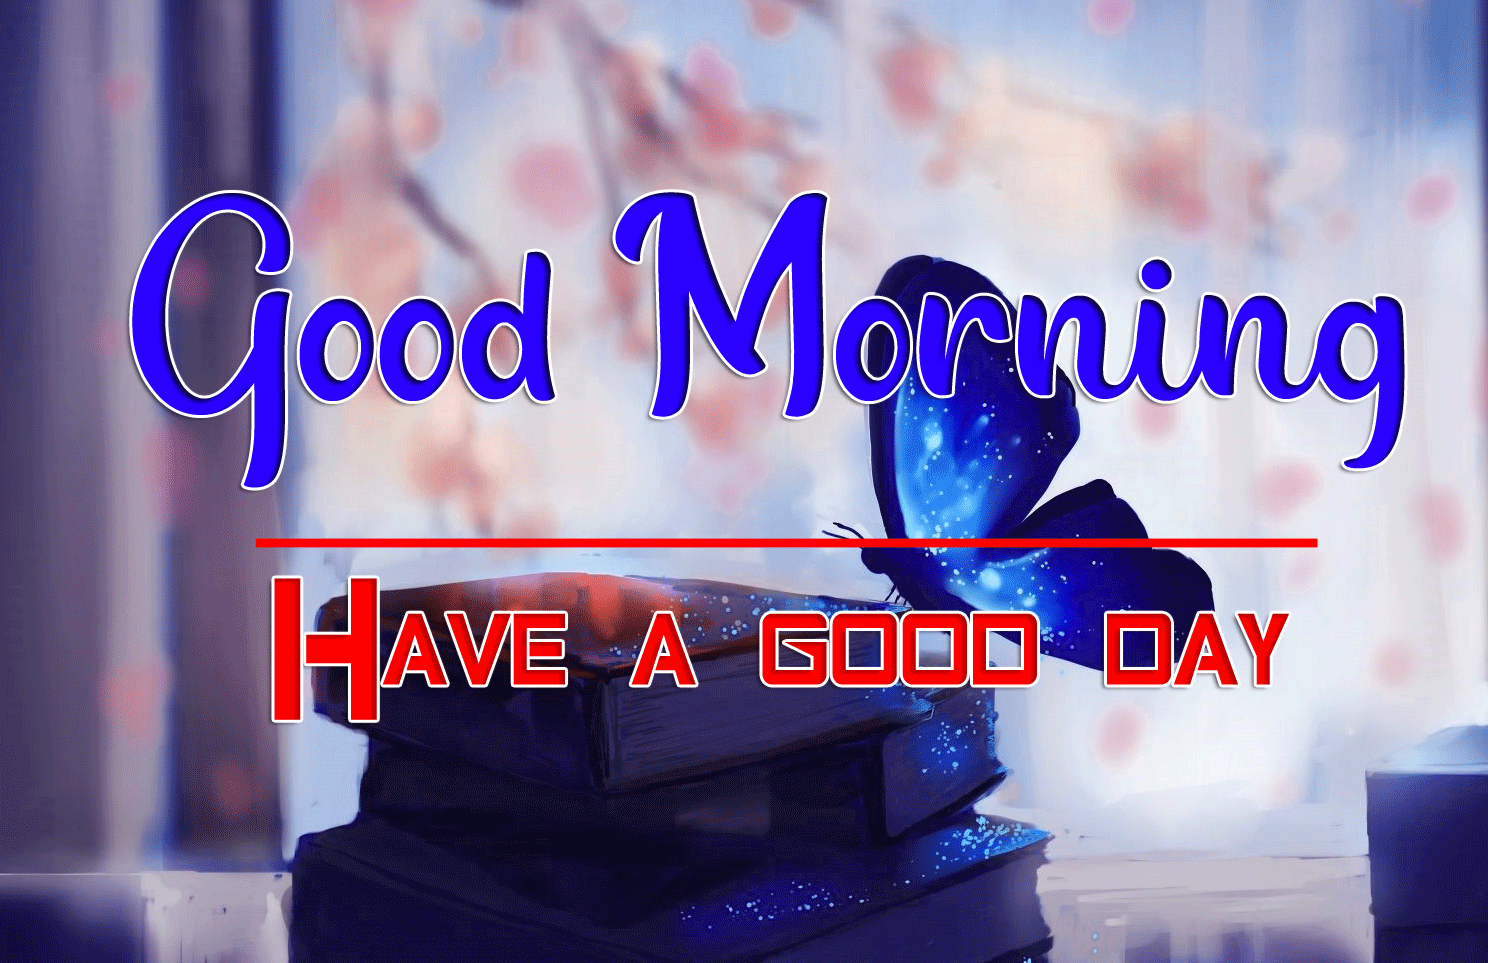 Good Morning Wishes Images HD 1080p 20